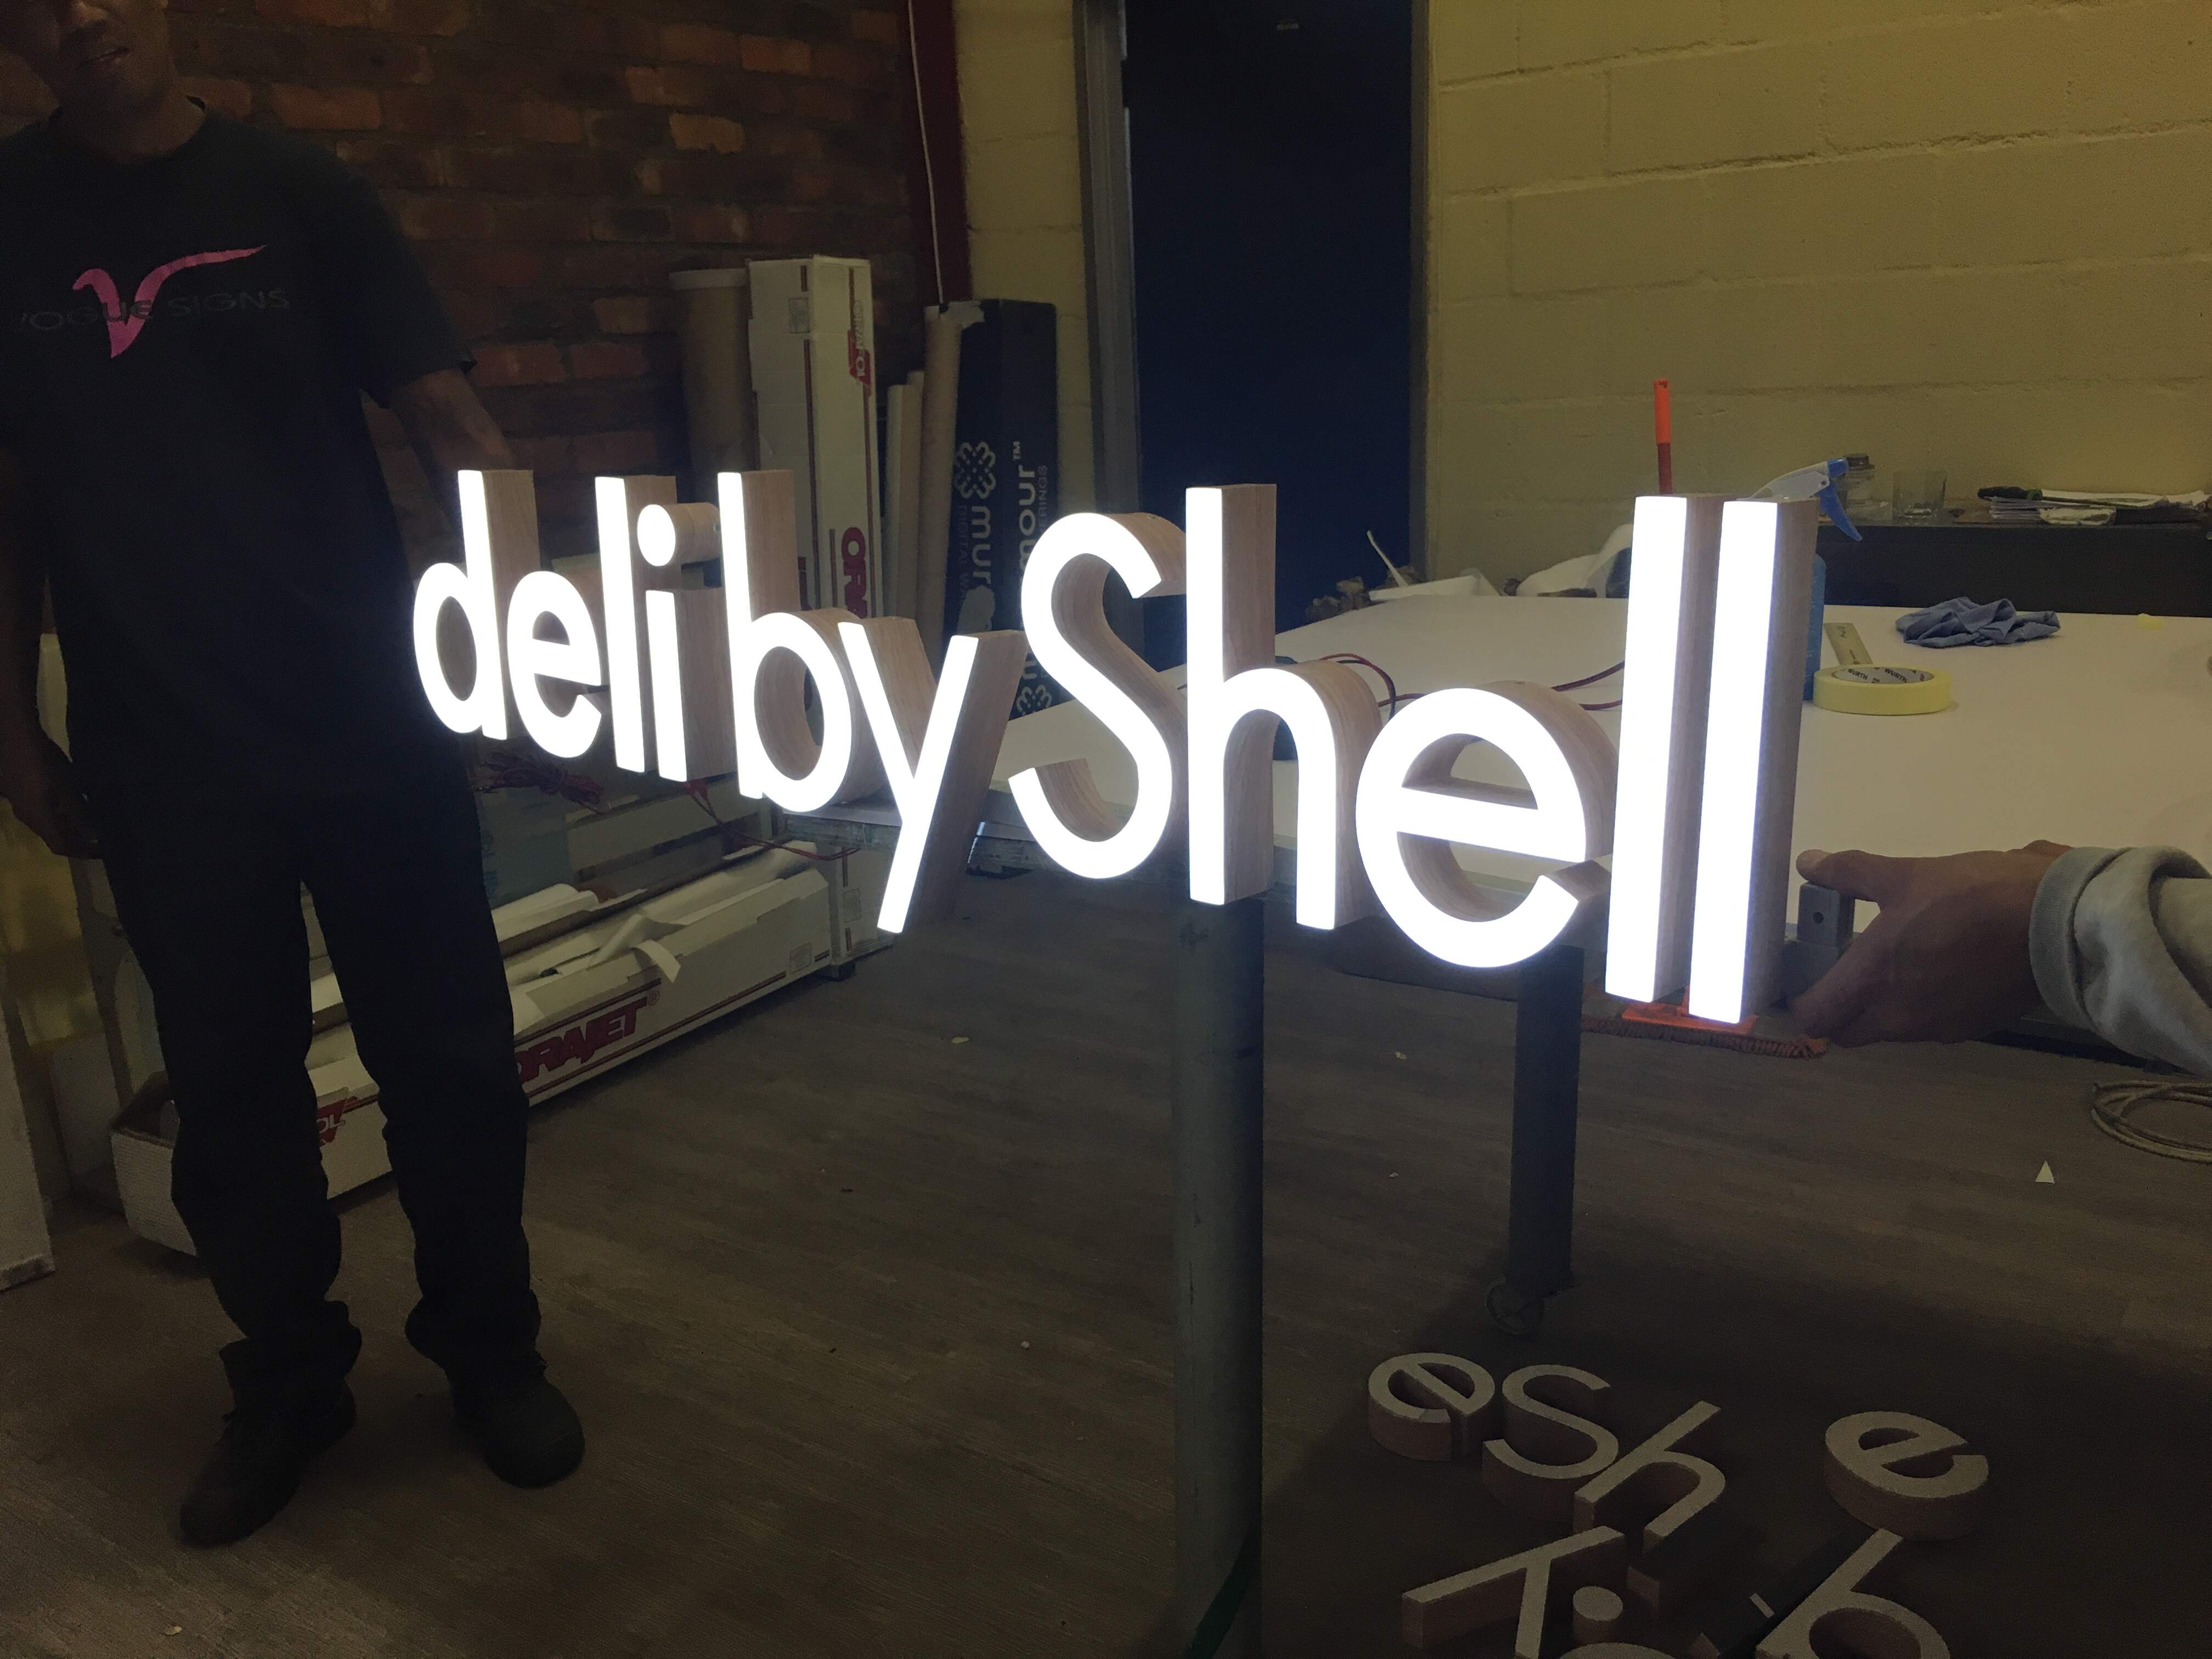 3D Fabricated with LEDs - Shell